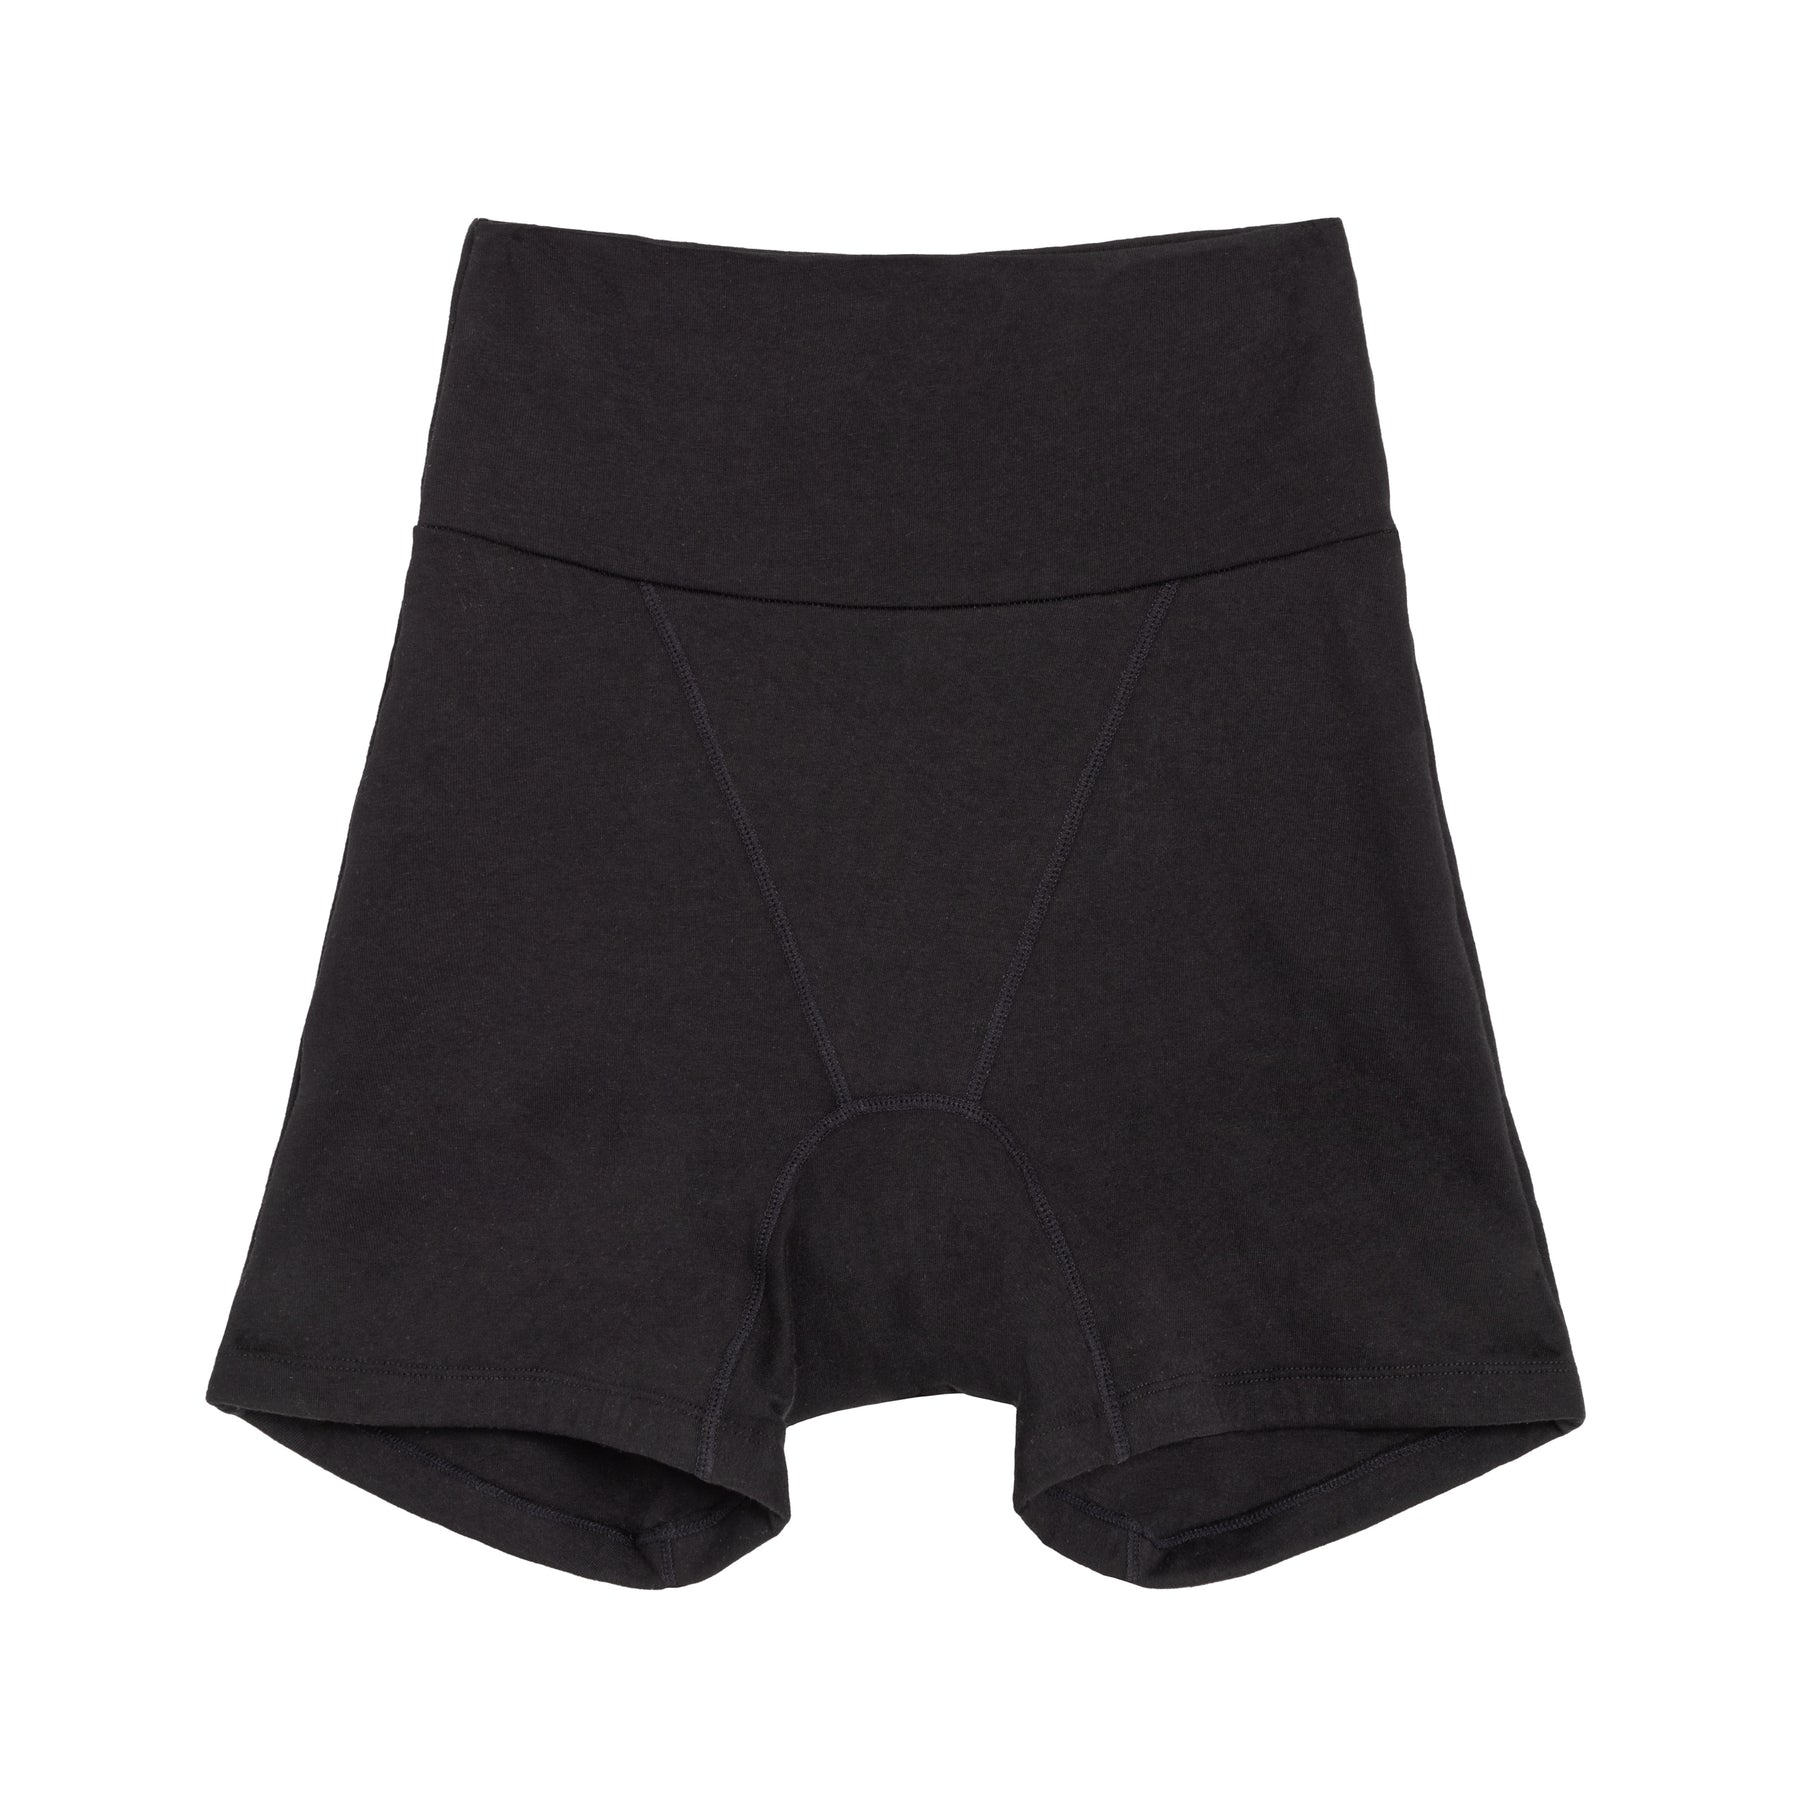 Peace of Mind Goat Union Period Sleep Shorts for Heavy Flow Highly